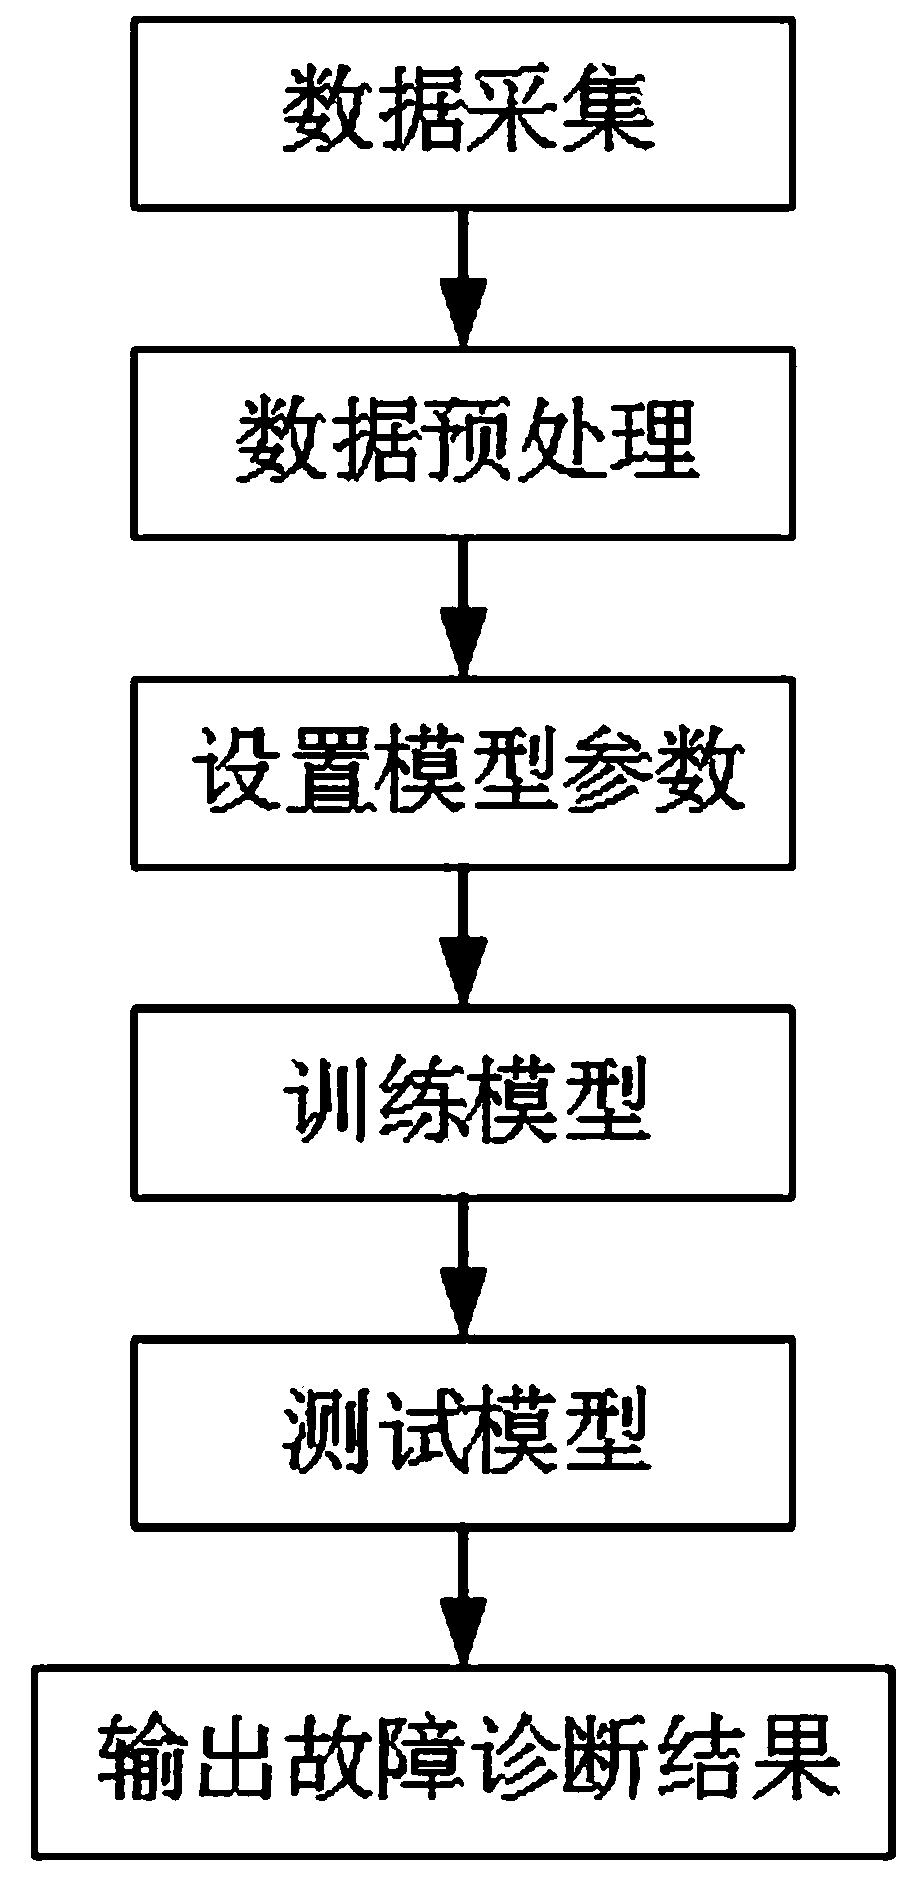 Electric energy metering device abnormality detecting method based on long and short term memory model